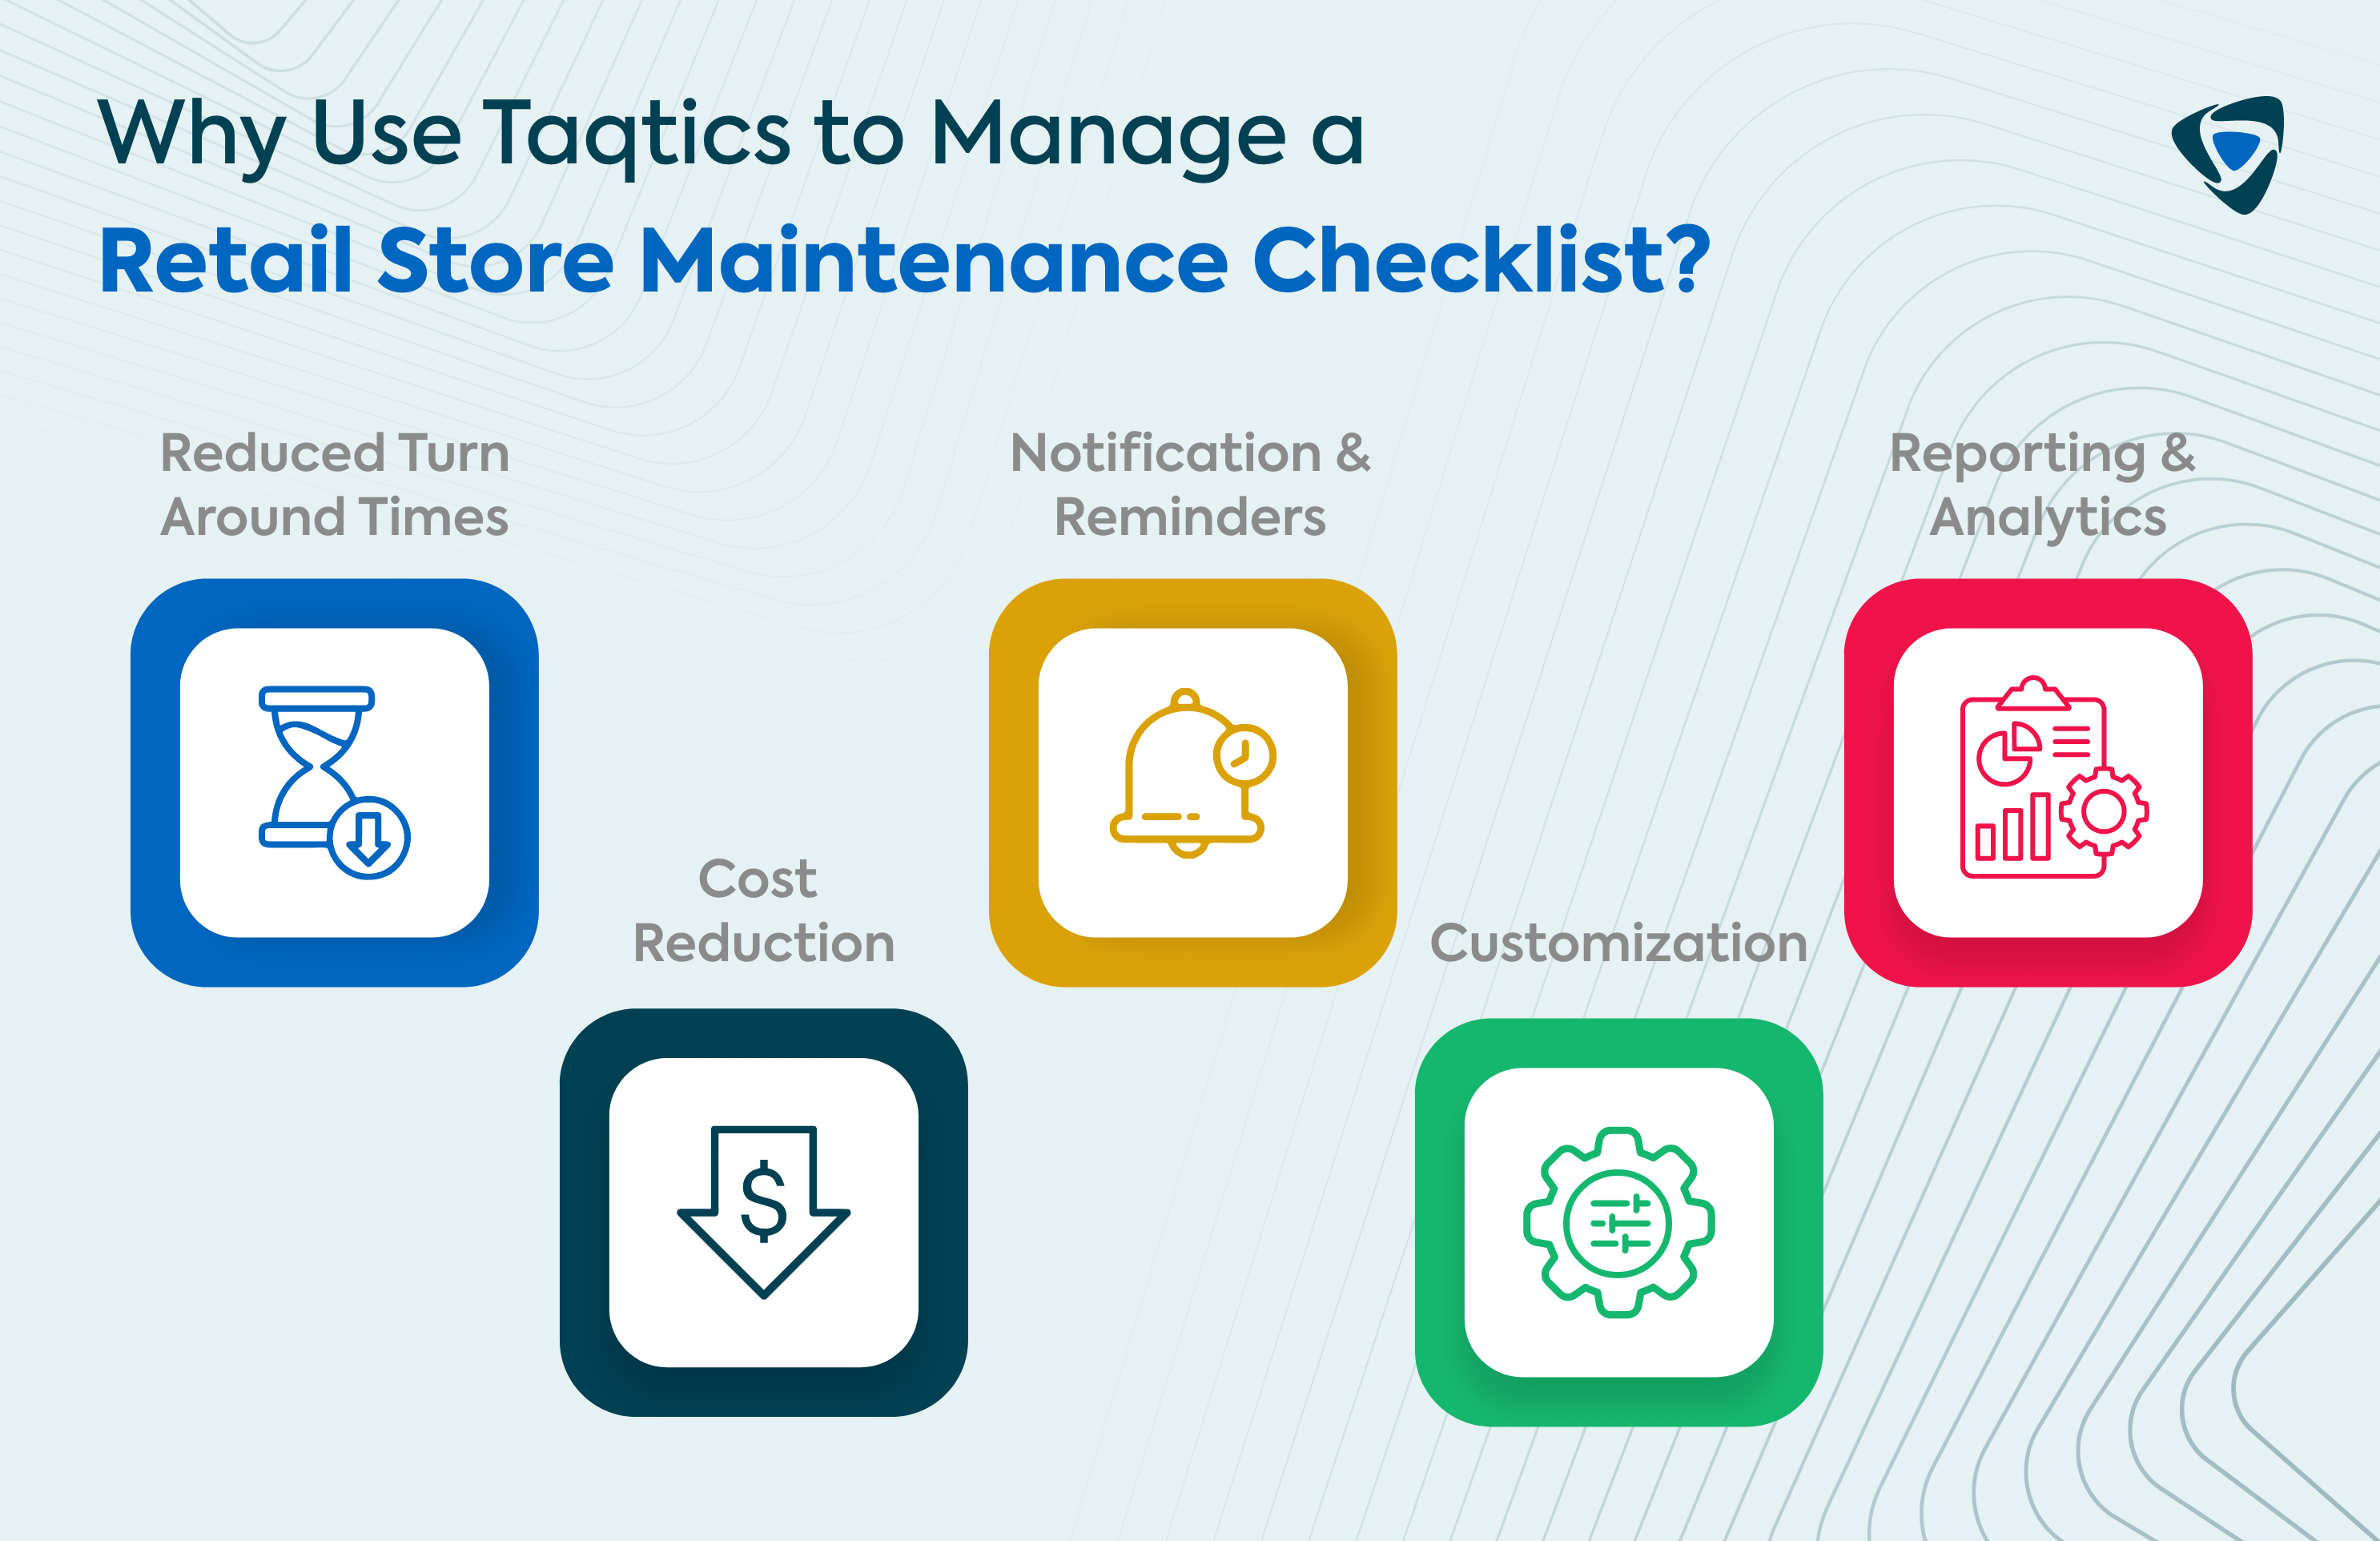 Why Use Taqtics to Manage a Retail Store Maintenance Checklist?